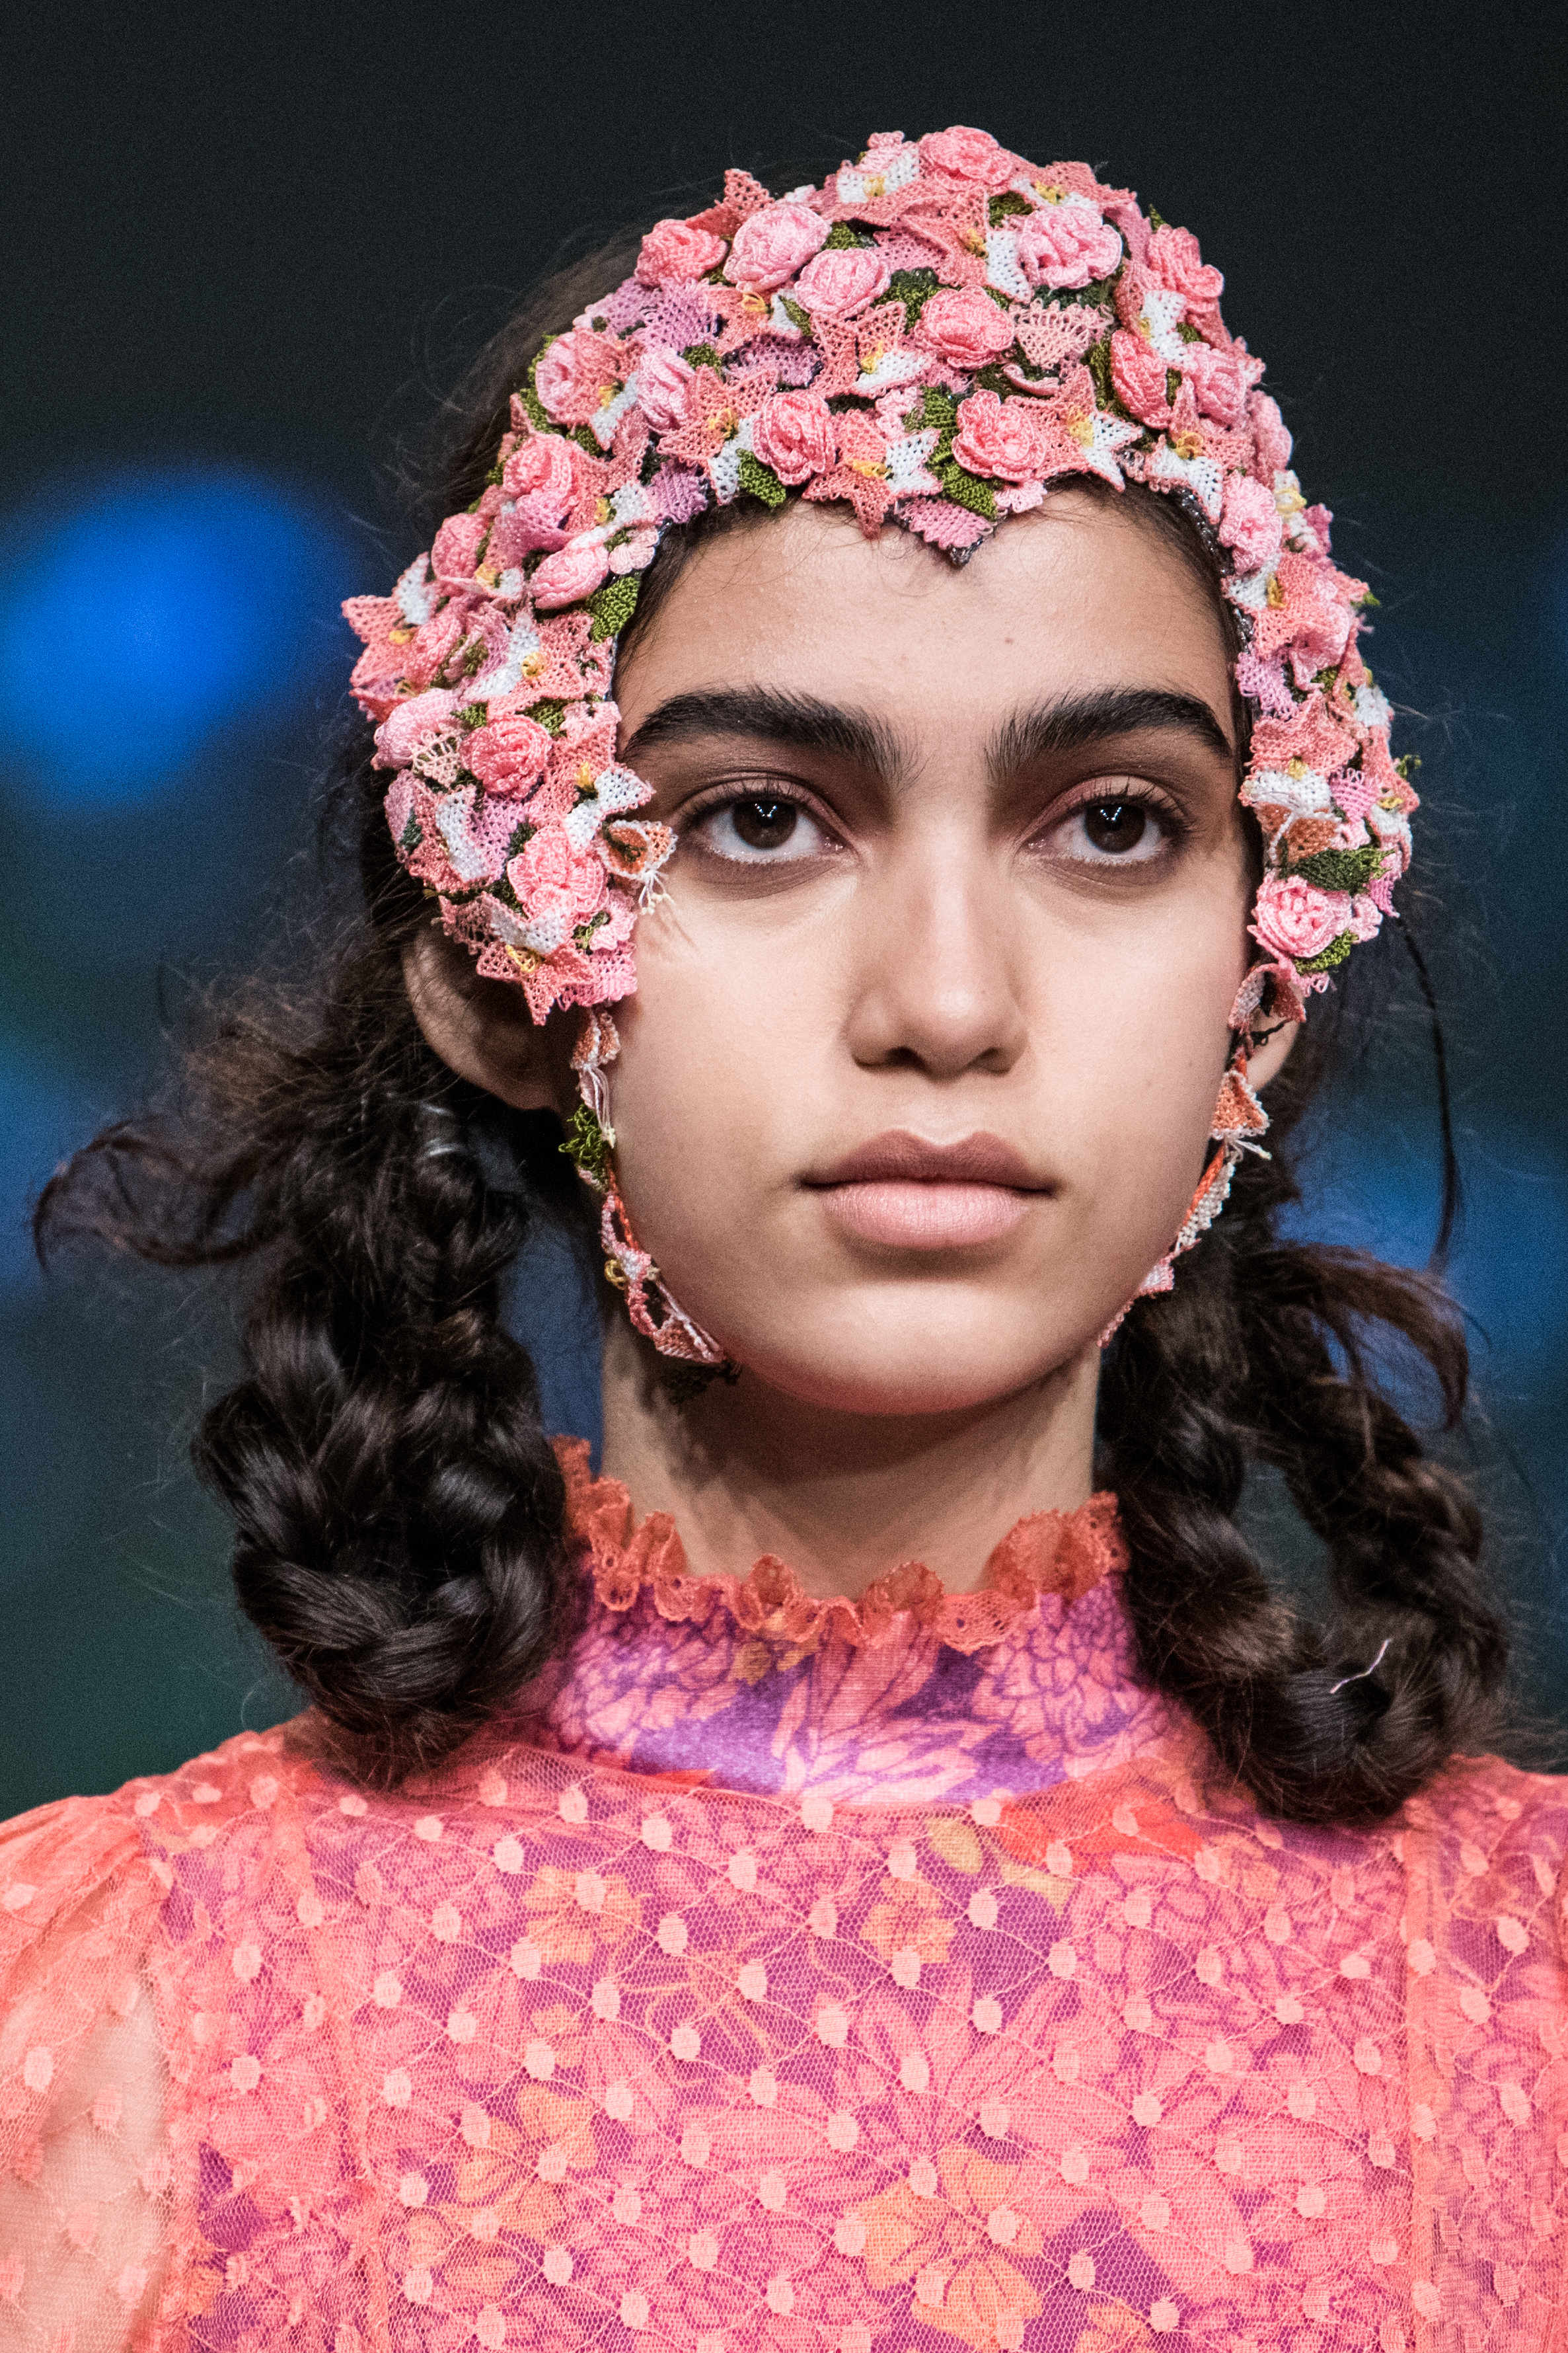 London Fashion Week SS19: Charting the best new season hairstyles